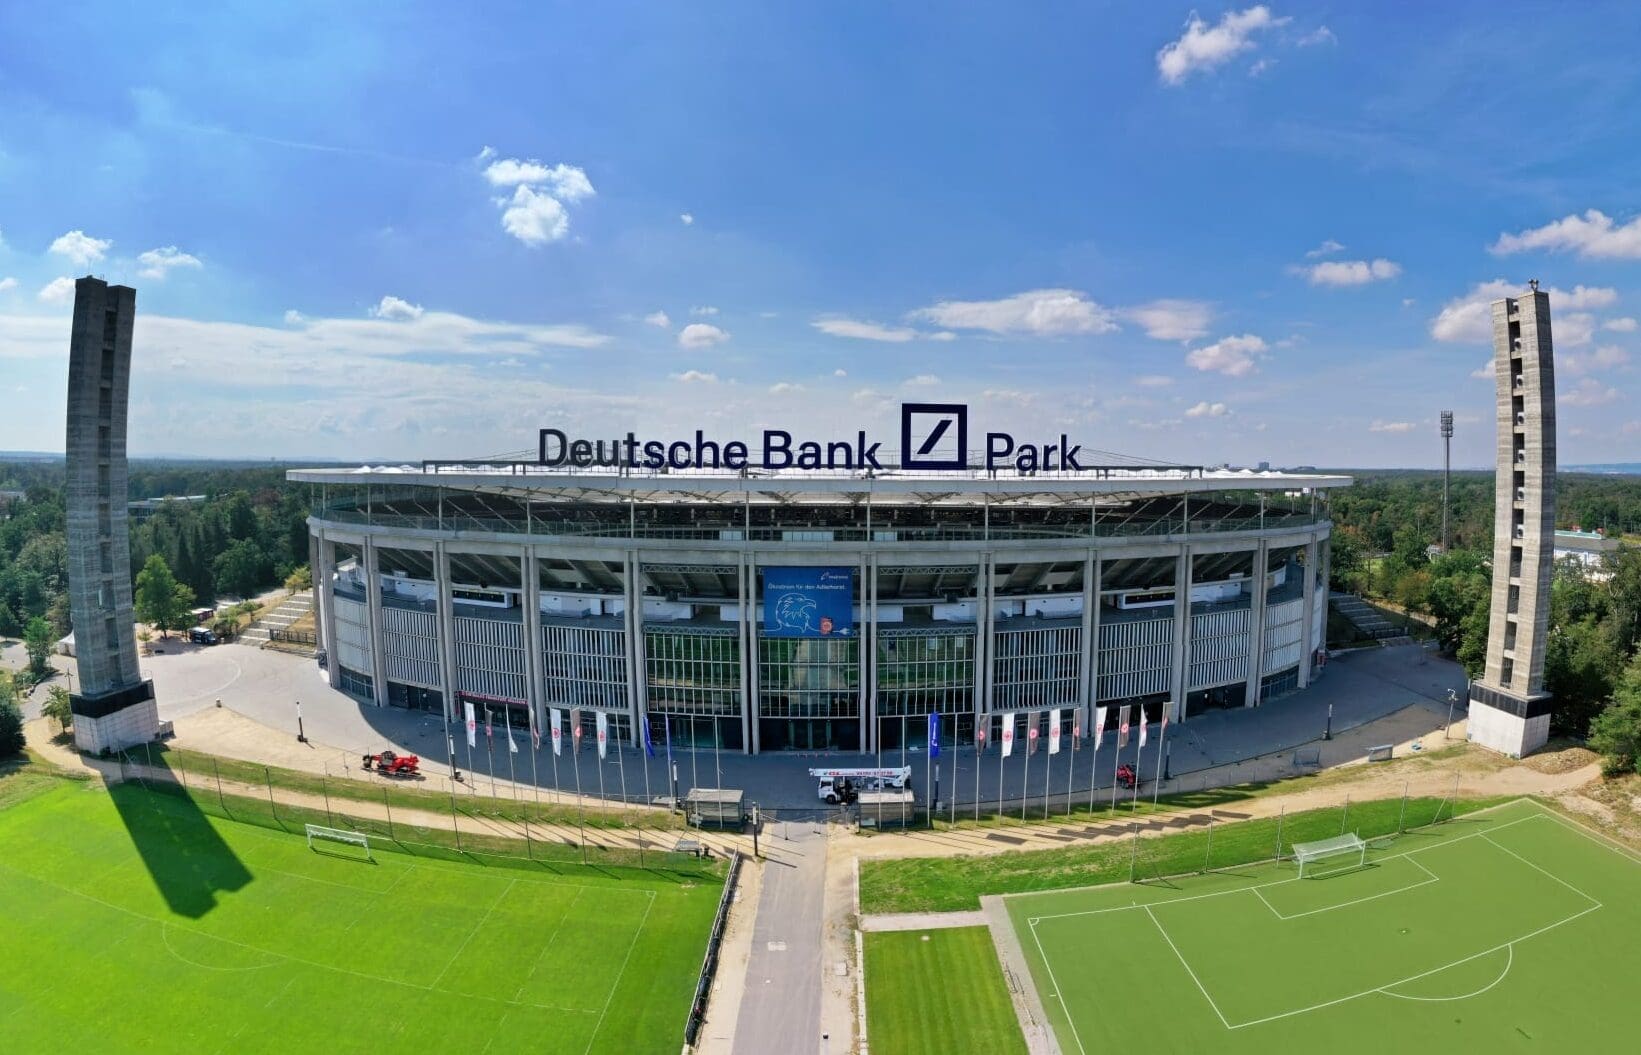 New England Patriots get ready to play at Deutsche Bank Park in Frankfurt, Germany